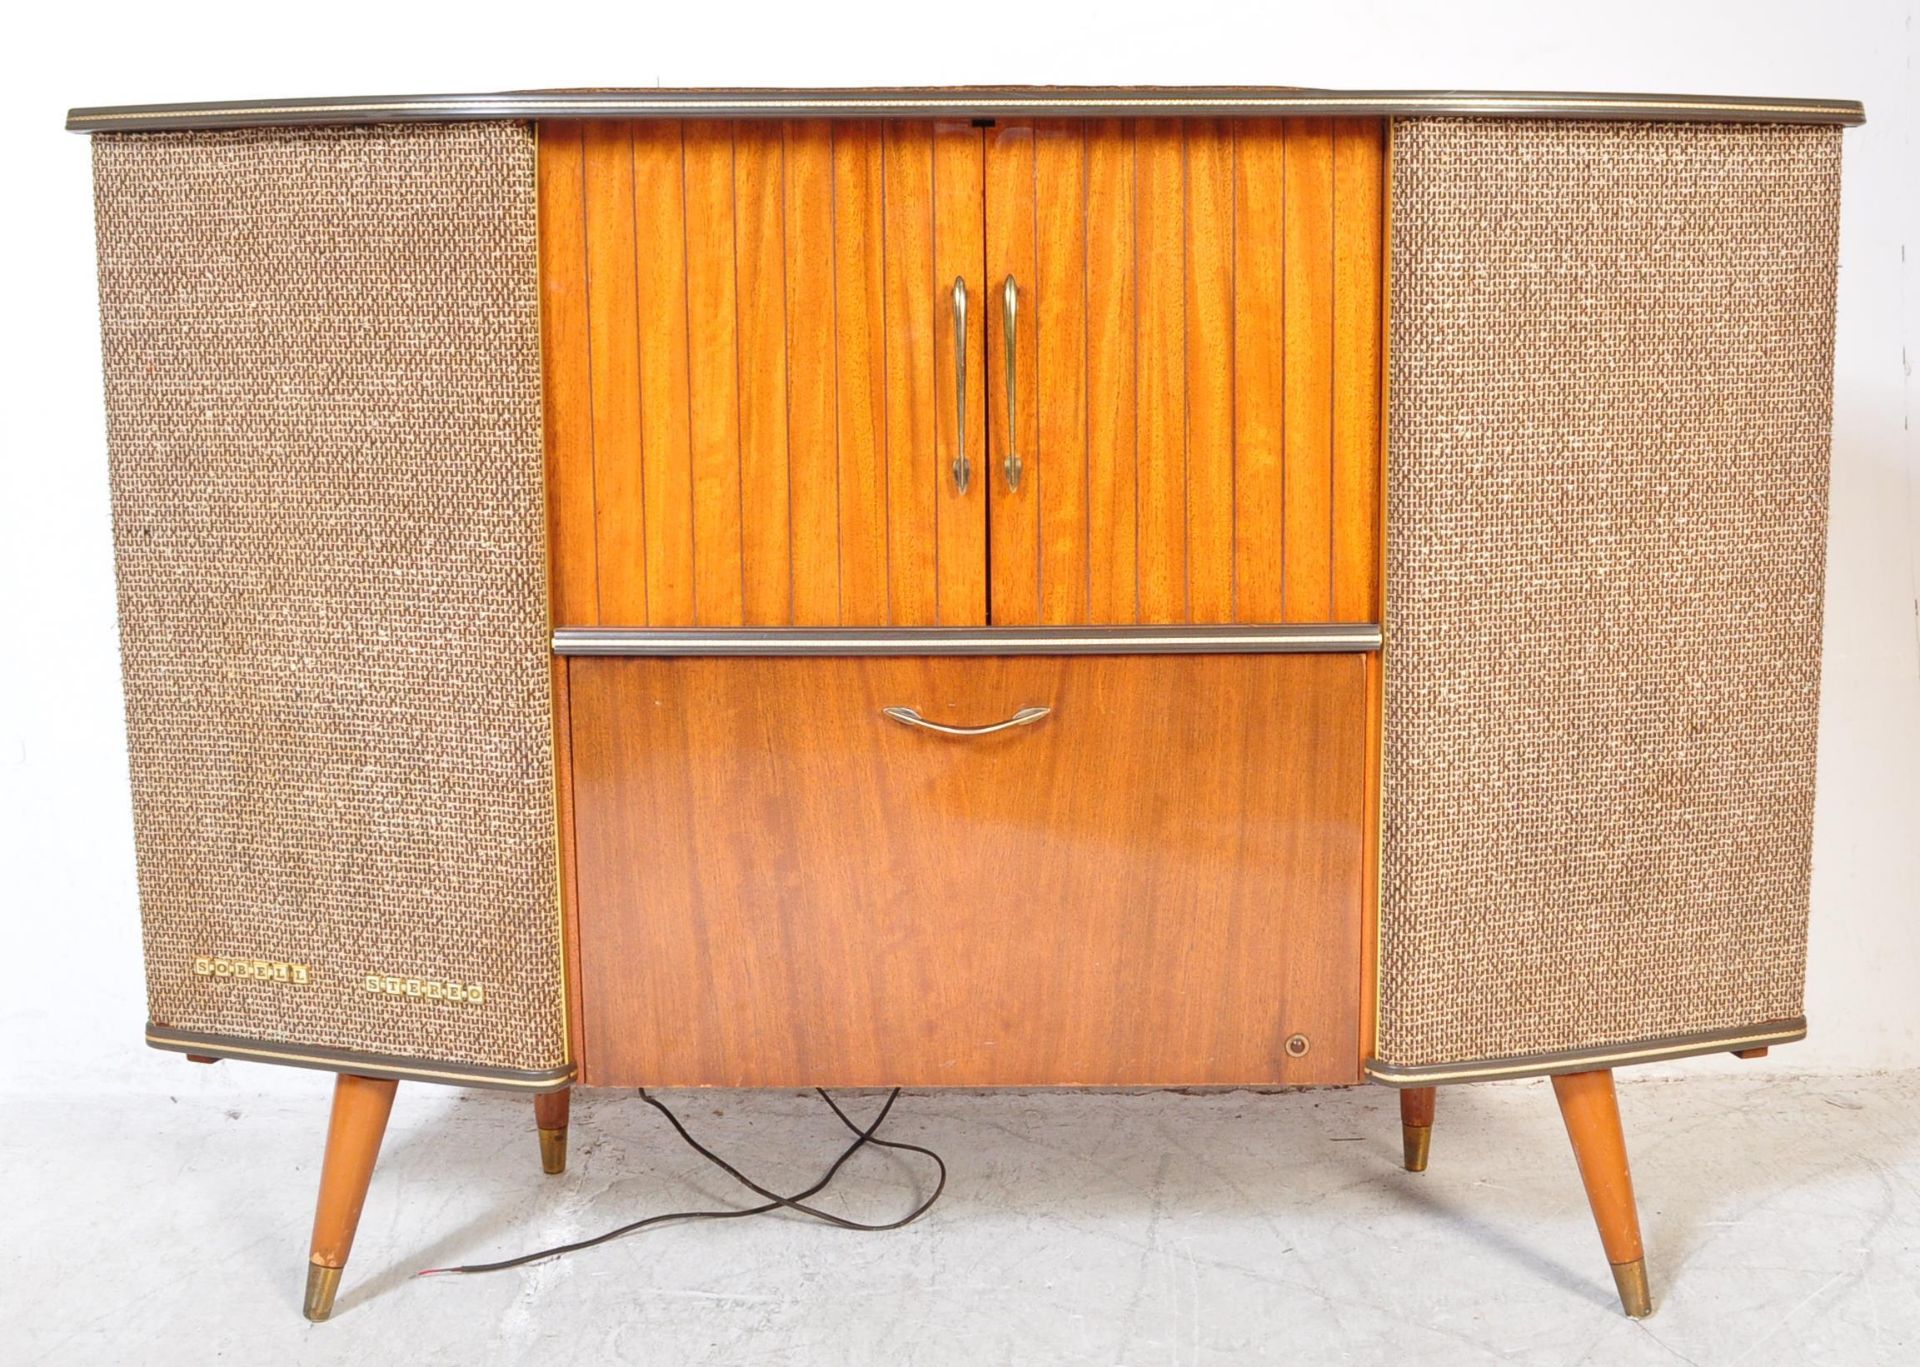 1950'S MID CENTUTY SOBELL STEREO RADIOGRAM SIDEBOARD - Image 2 of 4